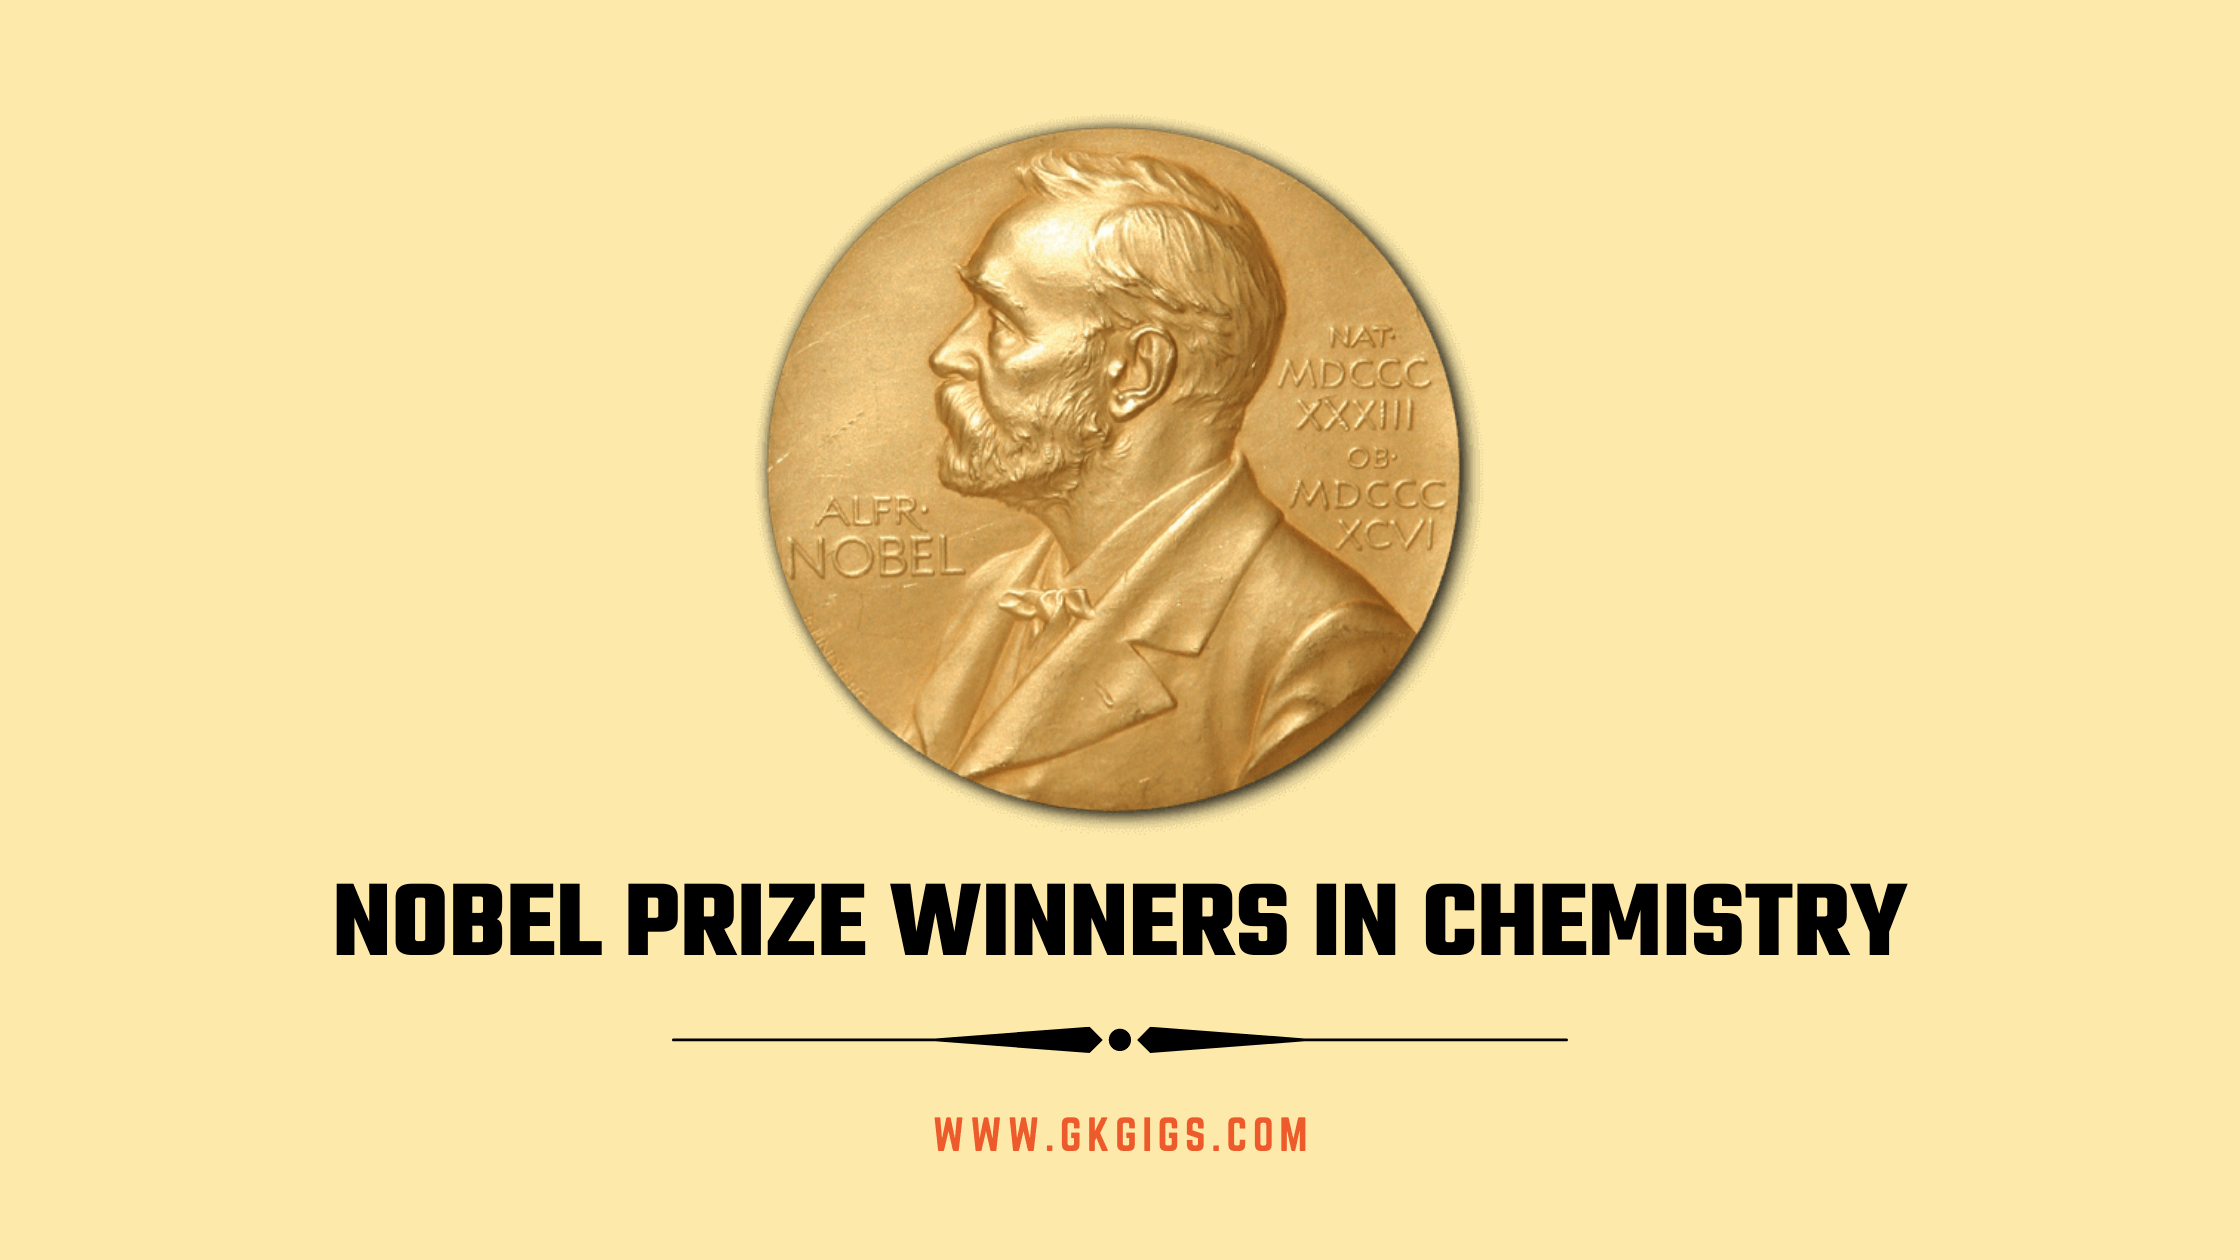 List Of All Nobel Prize Winners In Chemistry (2022 Updated) - GkGigs